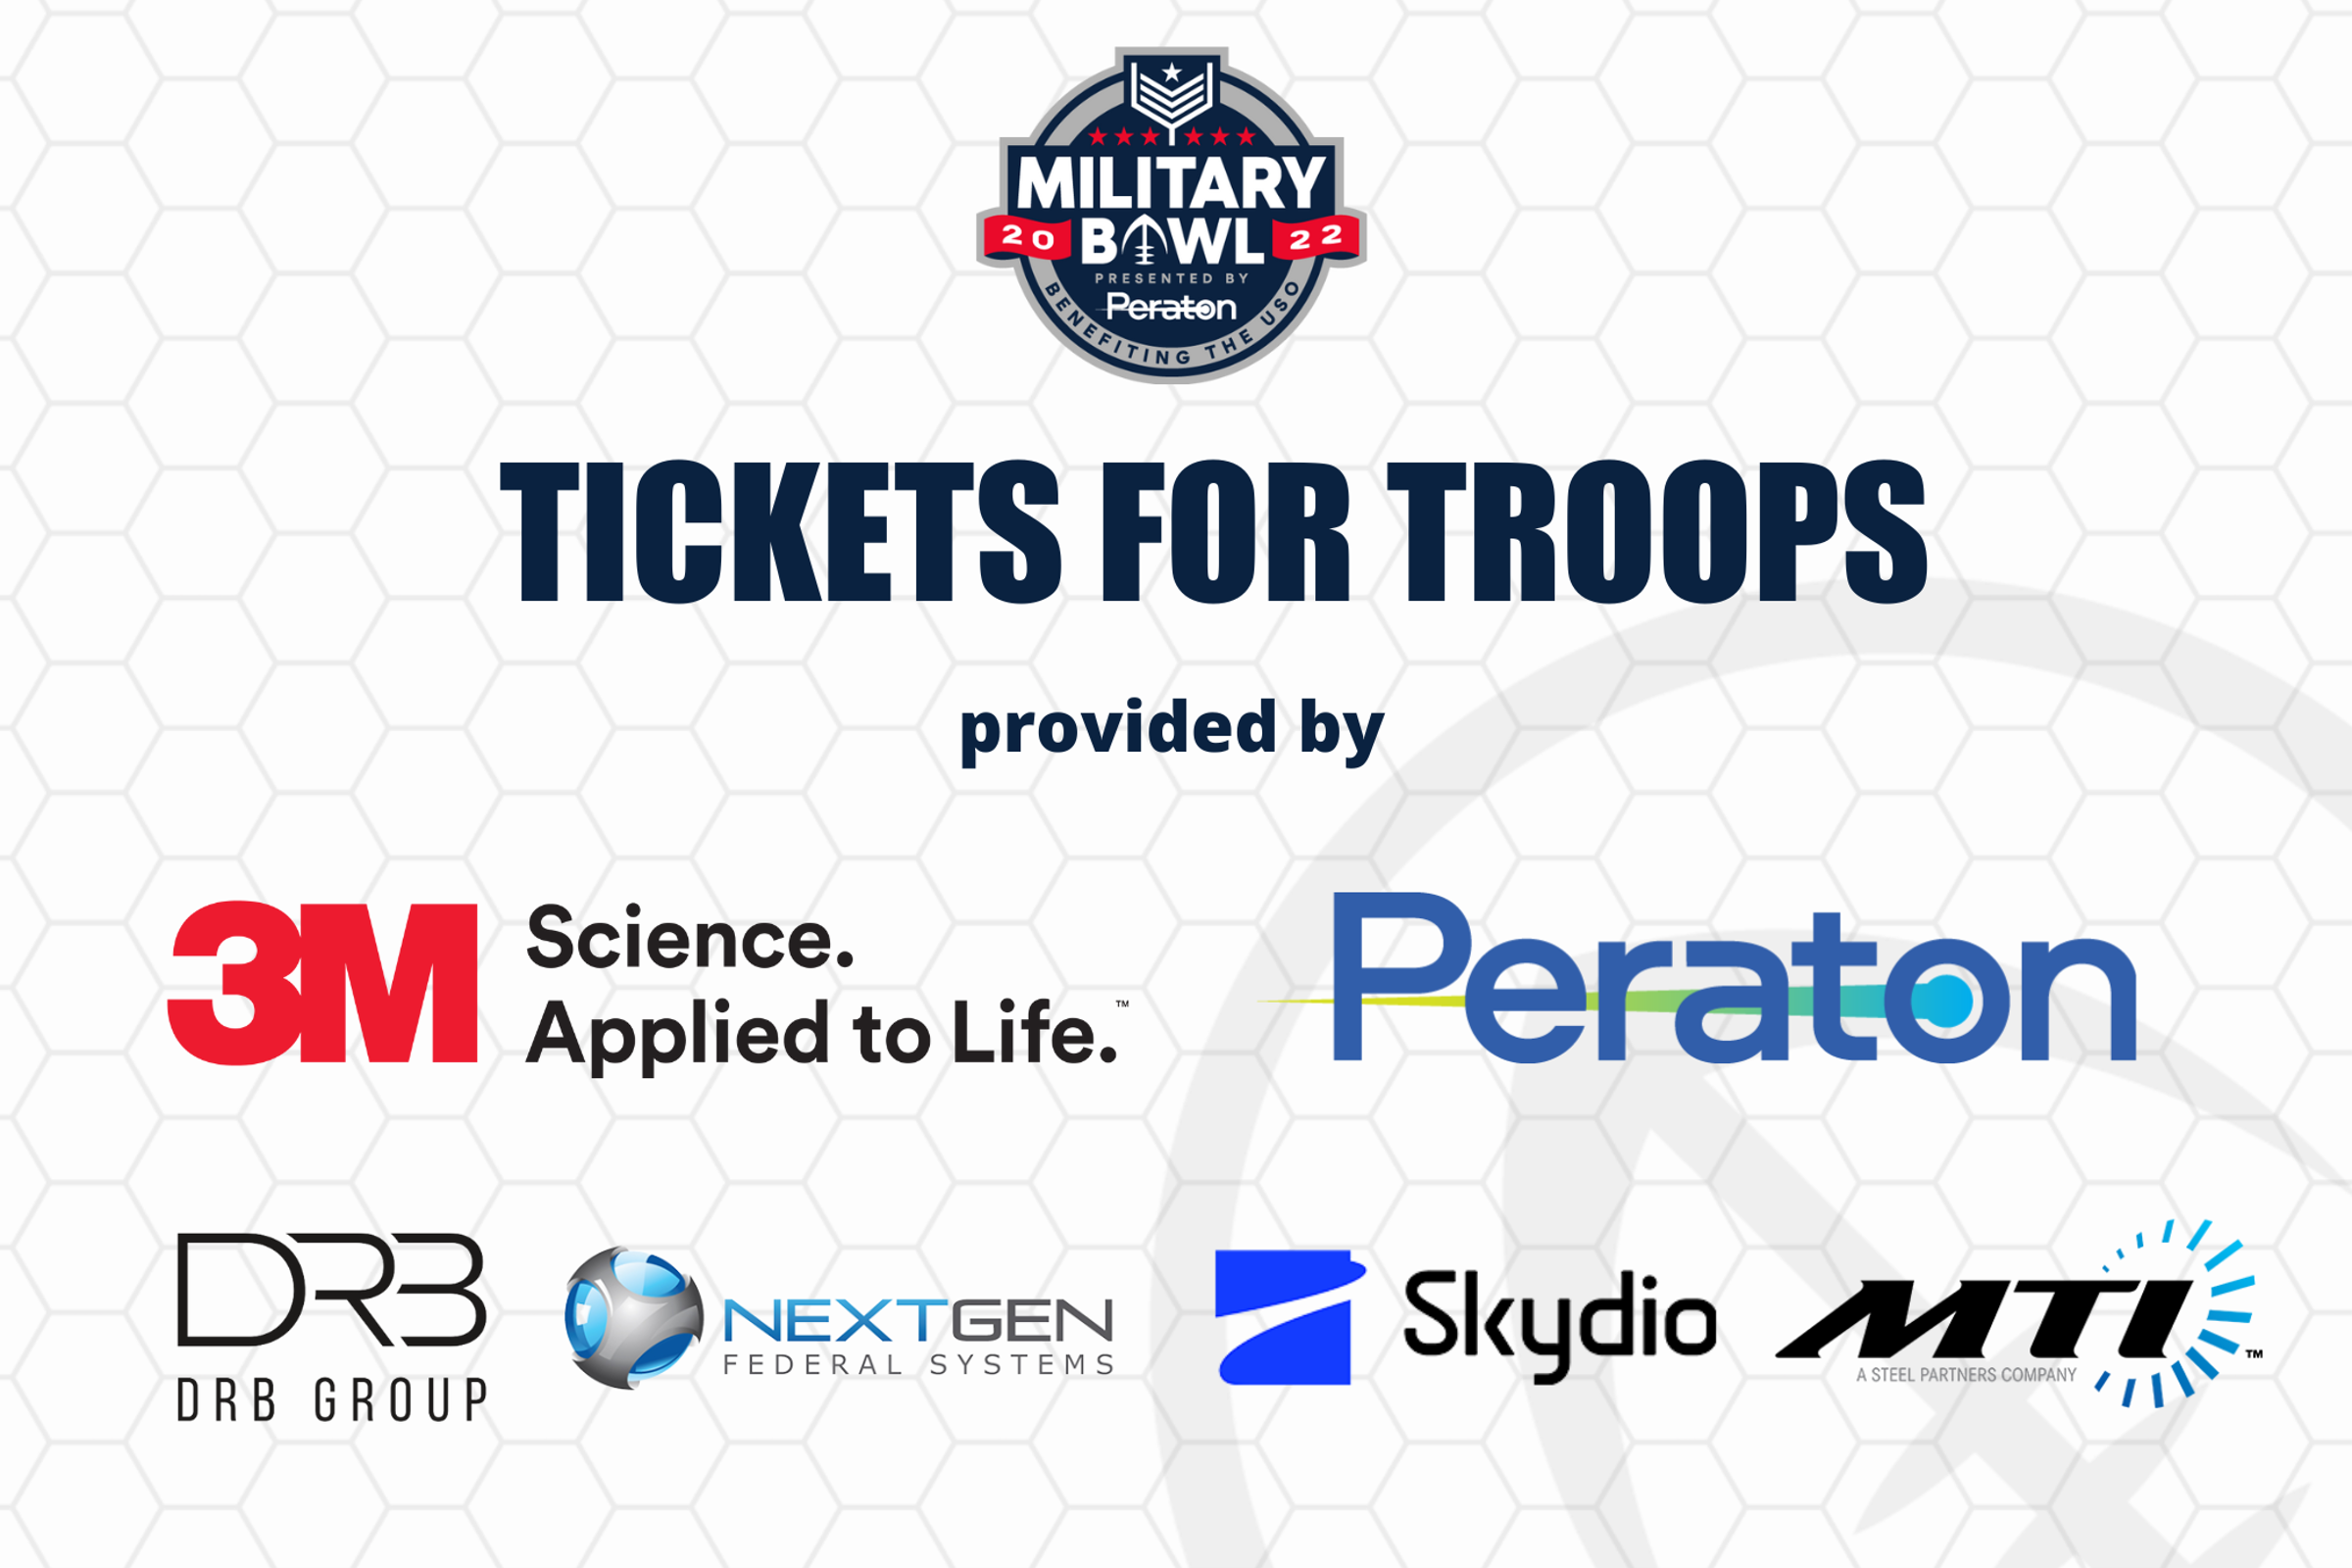 Tickets for military troops: Military Bowl provides complimentary tickets for service members